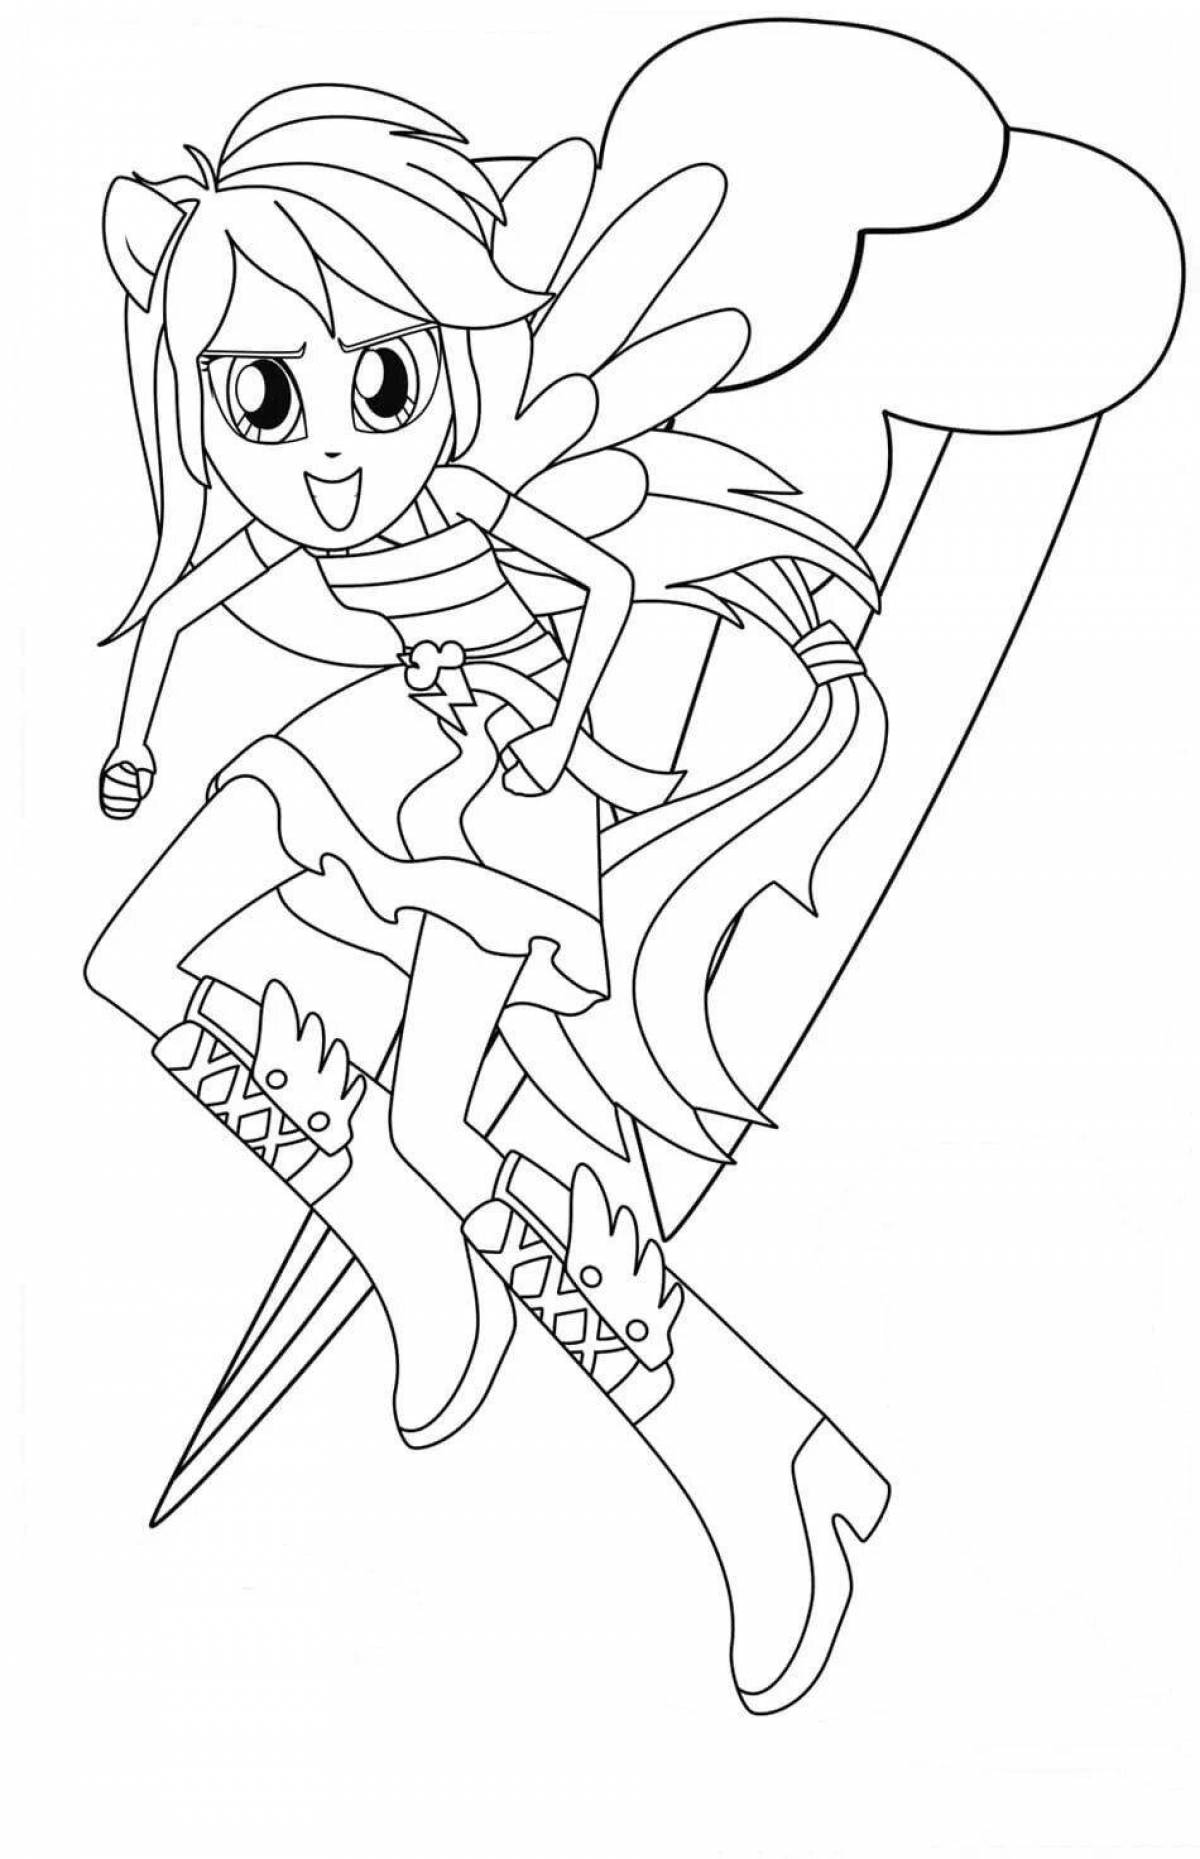 Coloring page adorable equestria girls